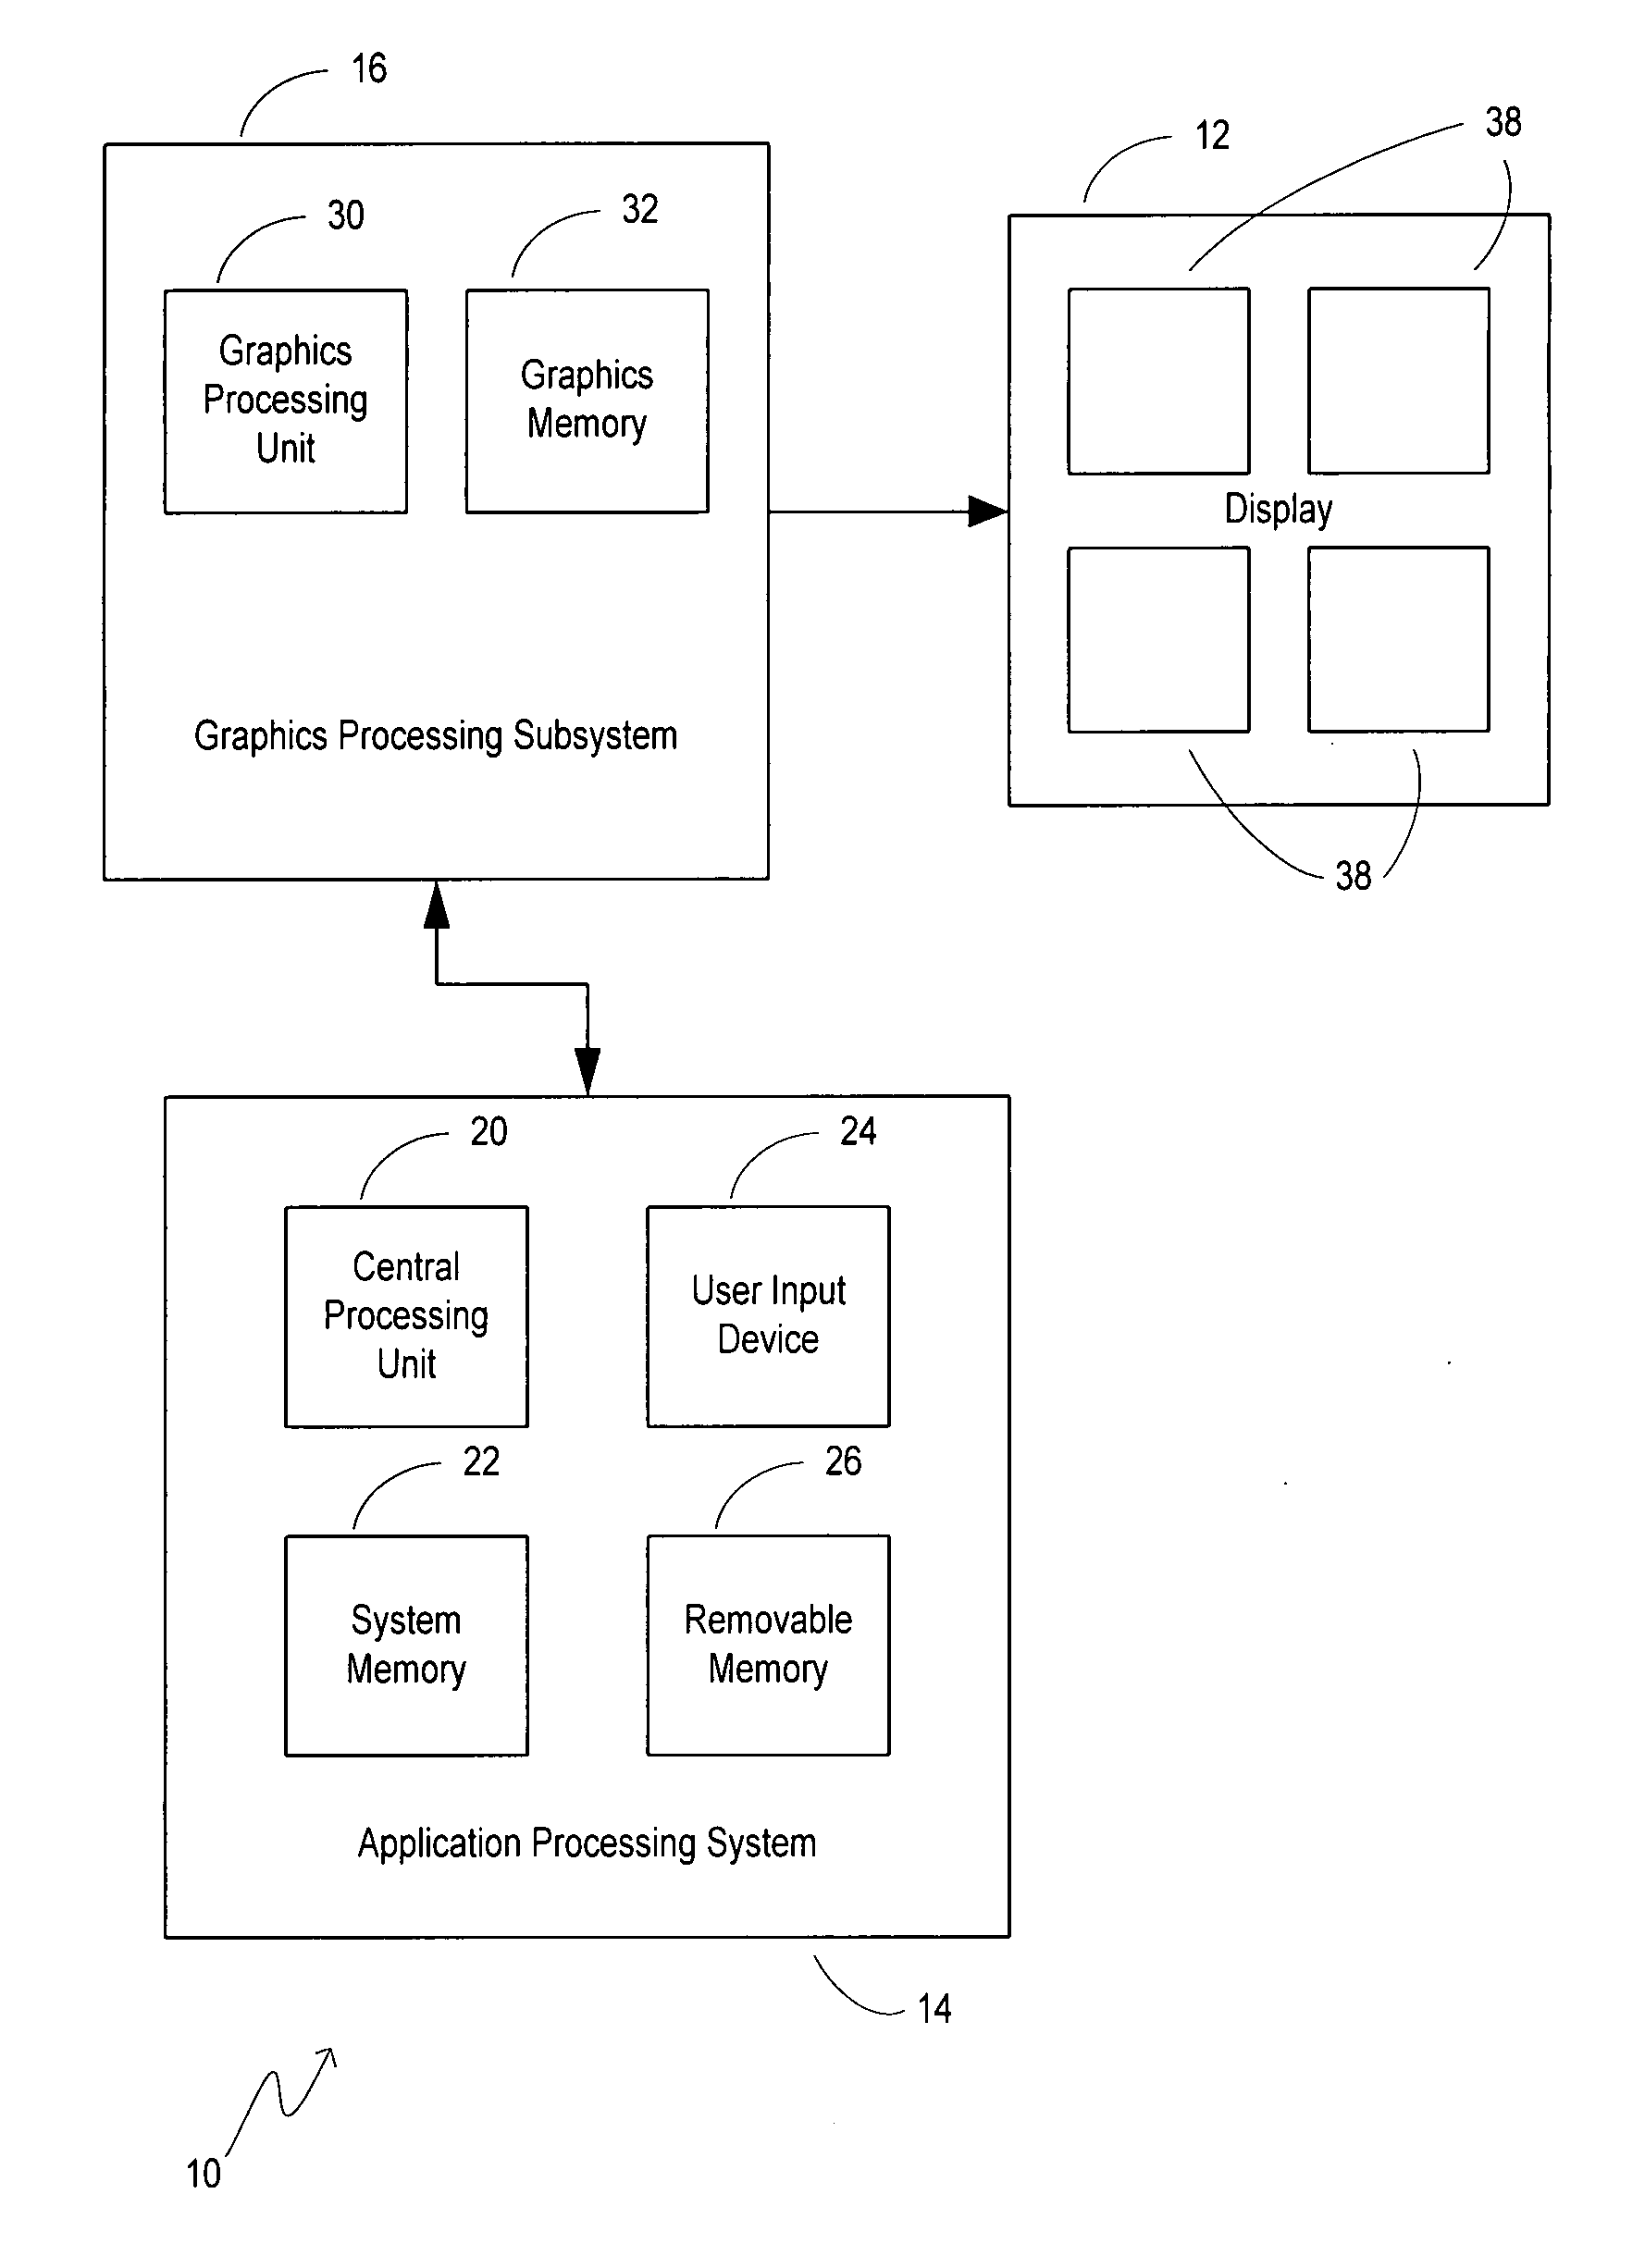 Compensation for display device flicker